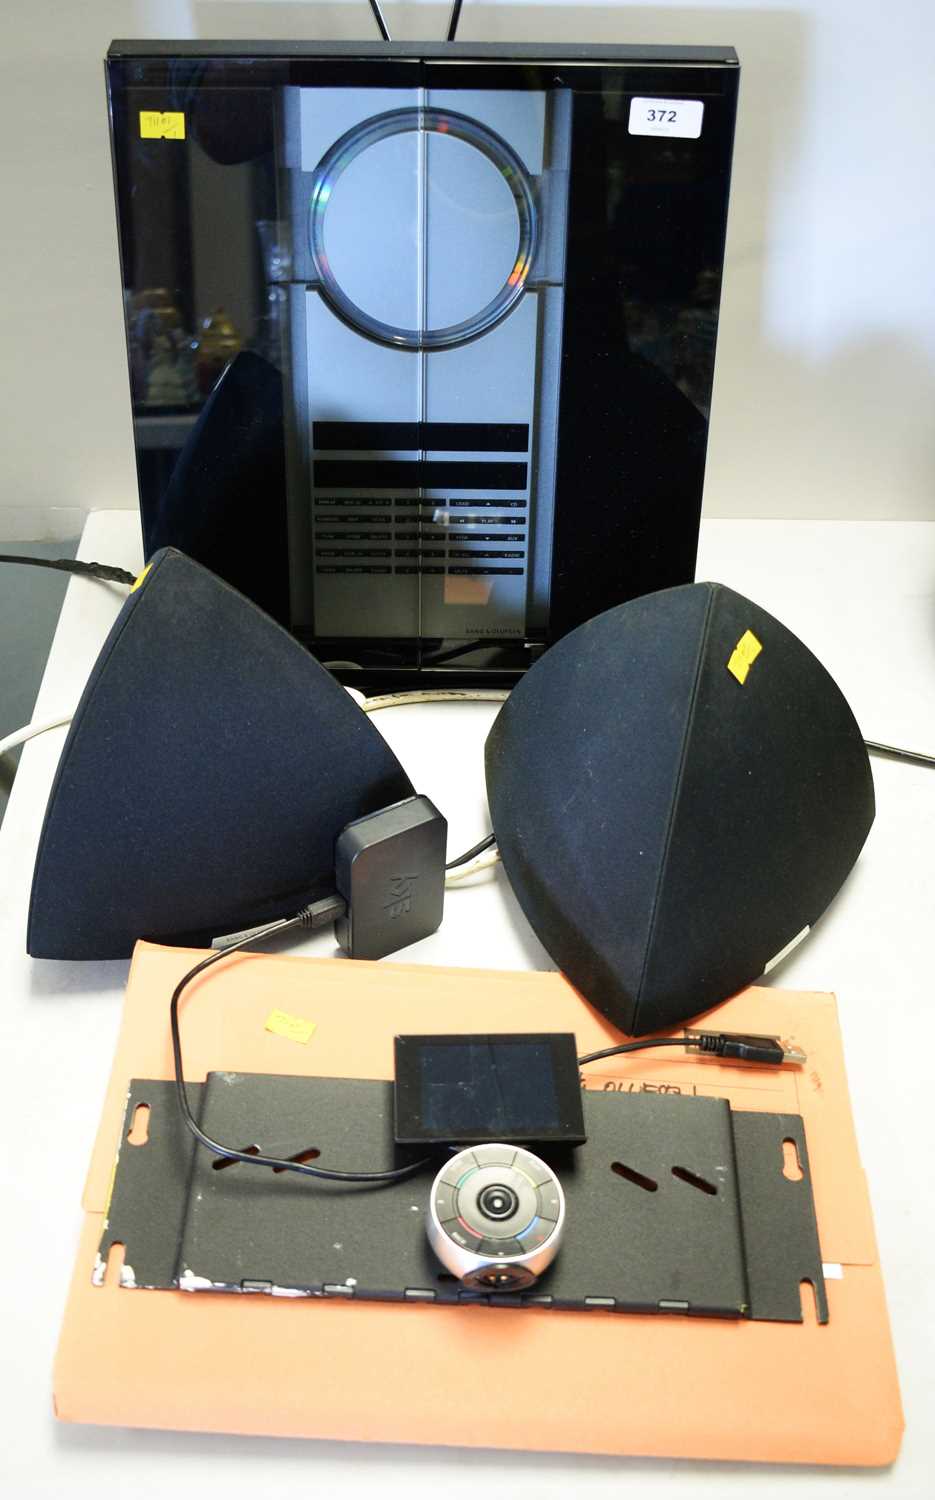 Lot 372 - Bang & Olufsen Beosound CD tuner, speakers and remote controller